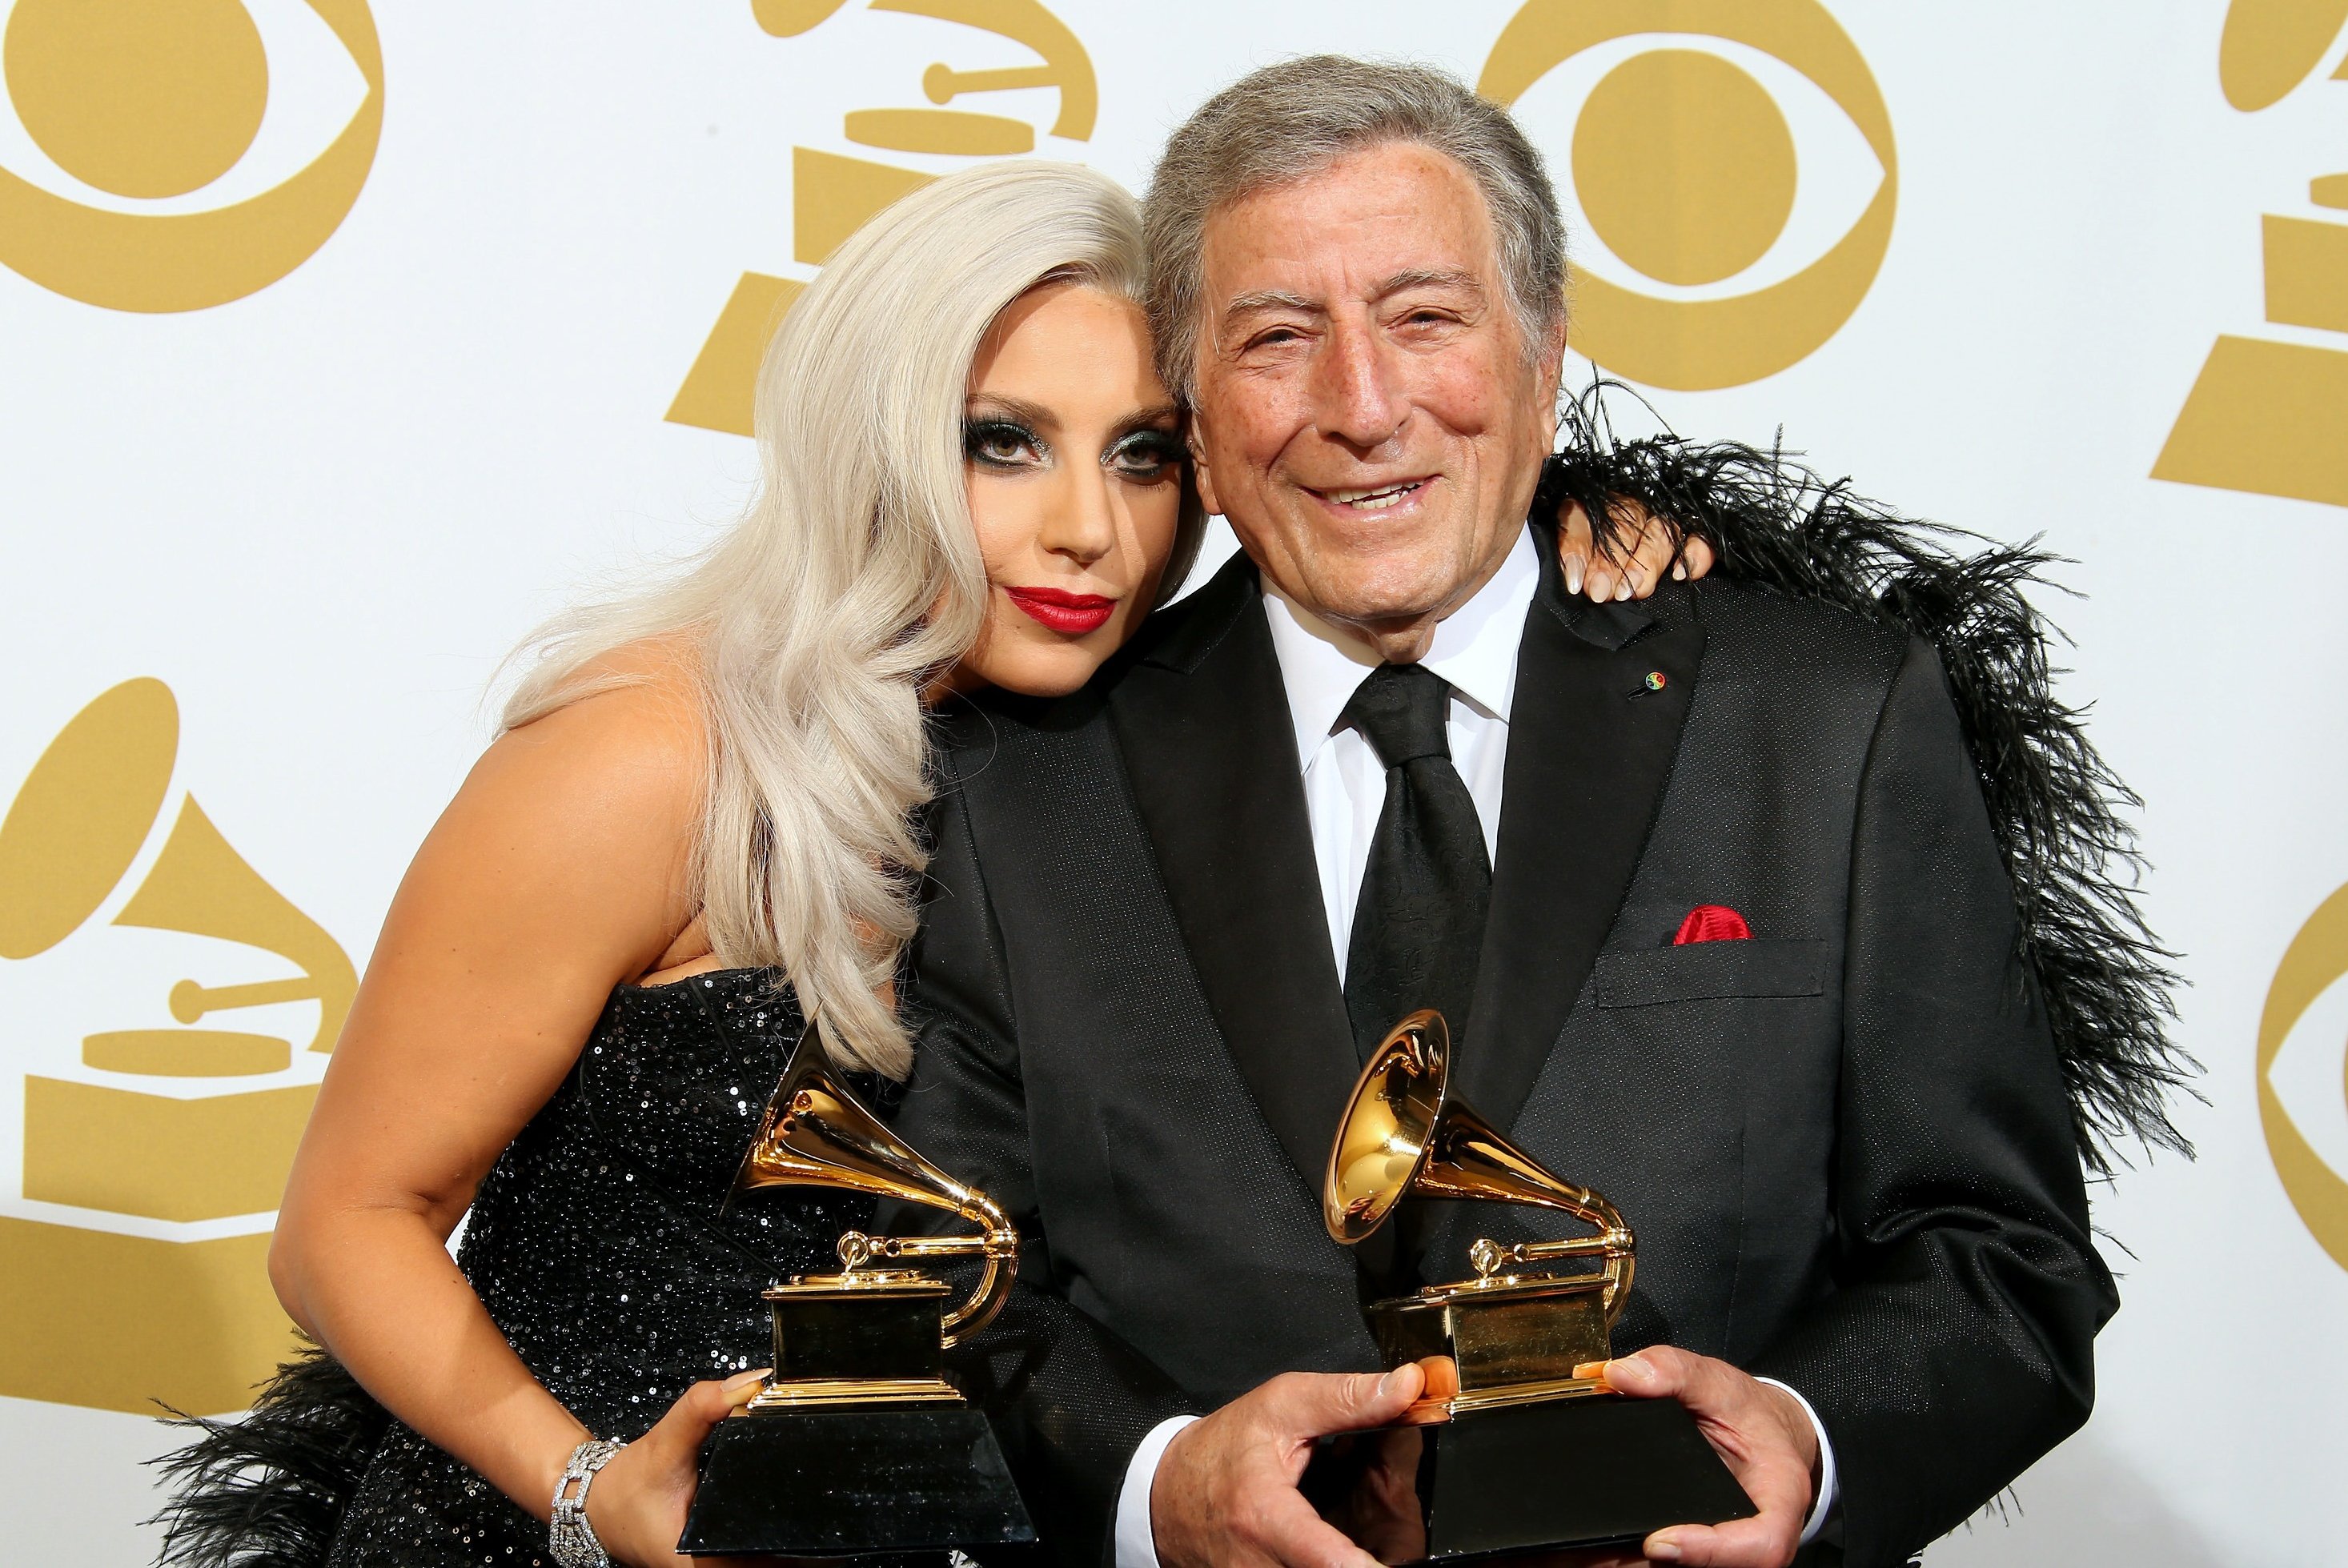 (L-R) Lady Gaga and Tony Bennett at the 60th Annual Grammy Award ceremony in 2018.